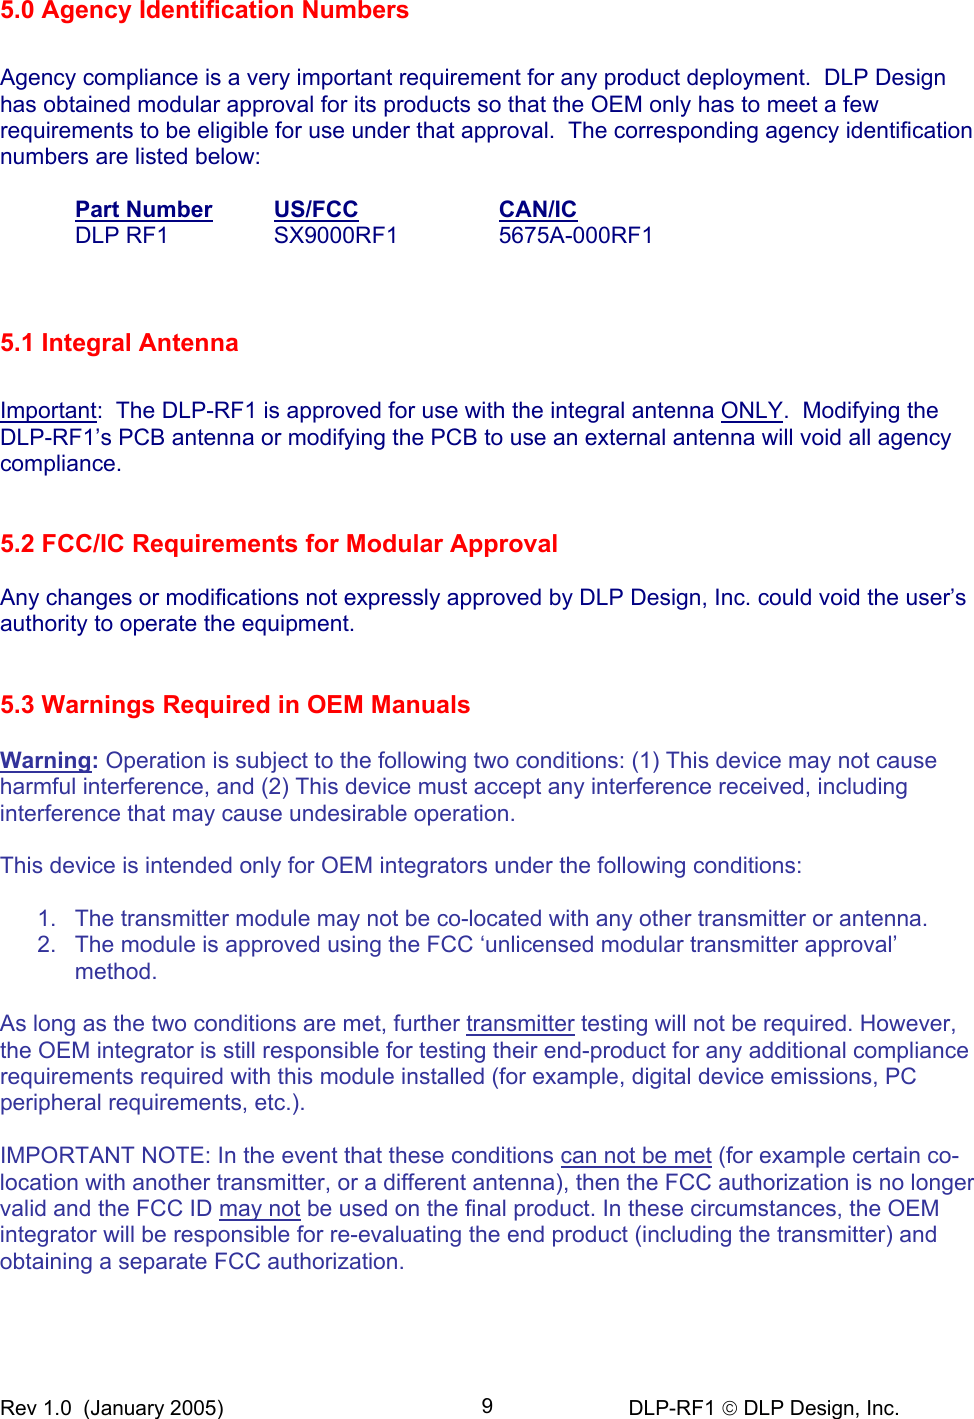 Rev 1.0  (January 2005)     DLP-RF1  DLP Design, Inc. 95.0 Agency Identification Numbers  Agency compliance is a very important requirement for any product deployment.  DLP Design has obtained modular approval for its products so that the OEM only has to meet a few requirements to be eligible for use under that approval.  The corresponding agency identification numbers are listed below:   Part Number  US/FCC  CAN/IC   DLP RF1  SX9000RF1  5675A-000RF1          5.1 Integral Antenna   Important:  The DLP-RF1 is approved for use with the integral antenna ONLY.  Modifying the DLP-RF1’s PCB antenna or modifying the PCB to use an external antenna will void all agency compliance.   5.2 FCC/IC Requirements for Modular Approval  Any changes or modifications not expressly approved by DLP Design, Inc. could void the user’s authority to operate the equipment.   5.3 Warnings Required in OEM Manuals  Warning: Operation is subject to the following two conditions: (1) This device may not cause harmful interference, and (2) This device must accept any interference received, including interference that may cause undesirable operation.  This device is intended only for OEM integrators under the following conditions:  1.  The transmitter module may not be co-located with any other transmitter or antenna. 2.  The module is approved using the FCC ‘unlicensed modular transmitter approval’ method.  As long as the two conditions are met, further transmitter testing will not be required. However, the OEM integrator is still responsible for testing their end-product for any additional compliance requirements required with this module installed (for example, digital device emissions, PC peripheral requirements, etc.).  IMPORTANT NOTE: In the event that these conditions can not be met (for example certain co-location with another transmitter, or a different antenna), then the FCC authorization is no longer valid and the FCC ID may not be used on the final product. In these circumstances, the OEM integrator will be responsible for re-evaluating the end product (including the transmitter) and obtaining a separate FCC authorization.   